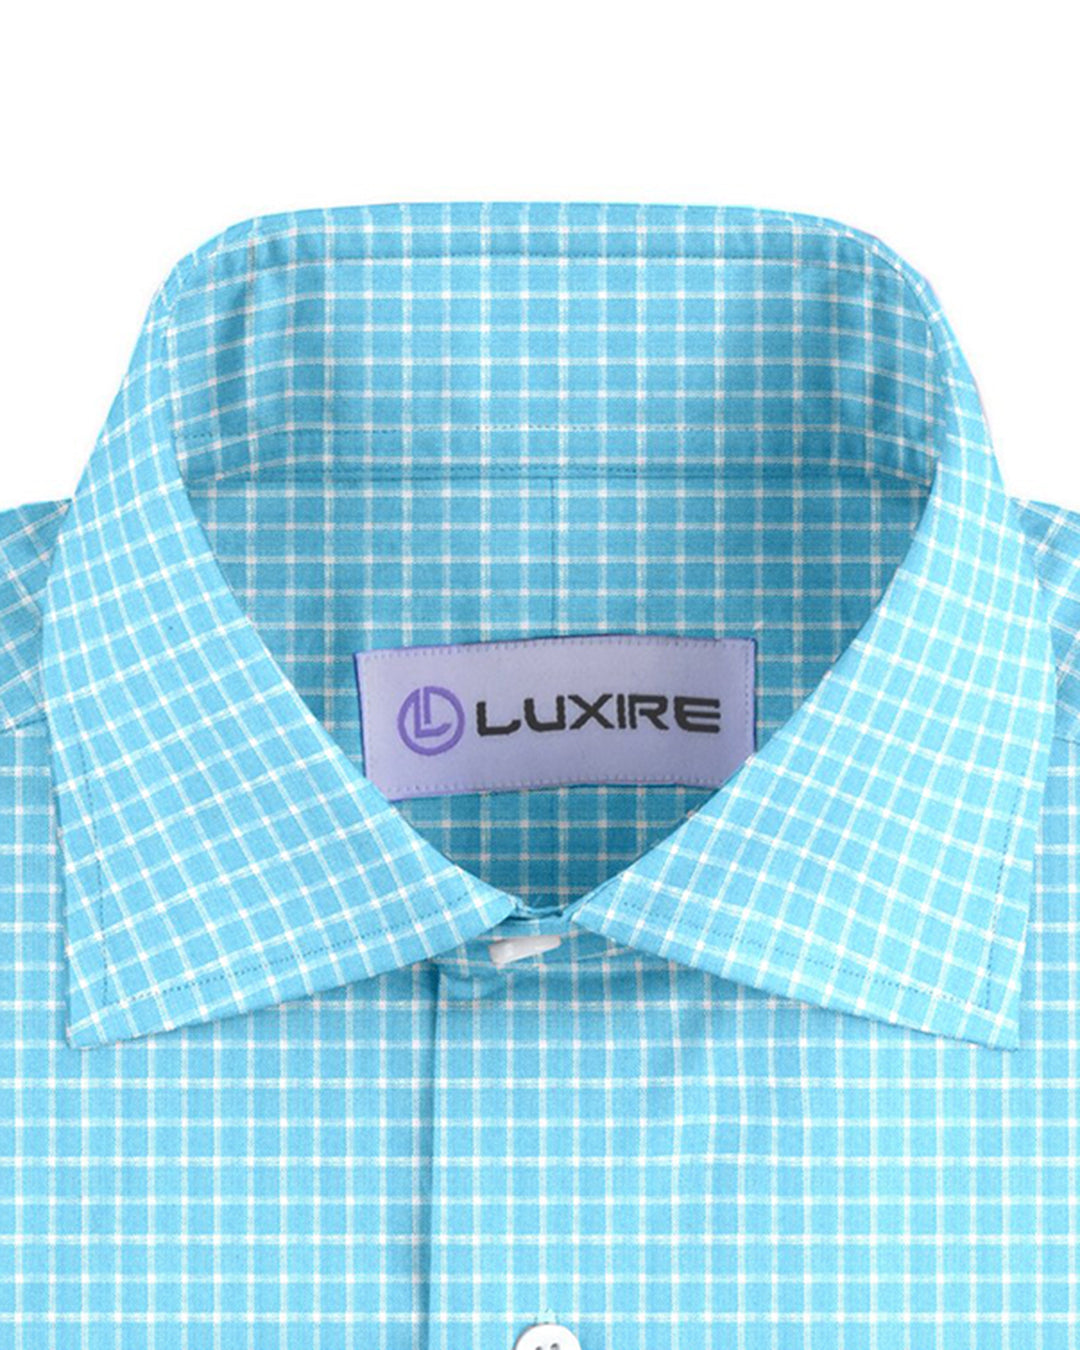 Collar of the custom linen shirt for men in teal and blue checks by Luxire Clothing